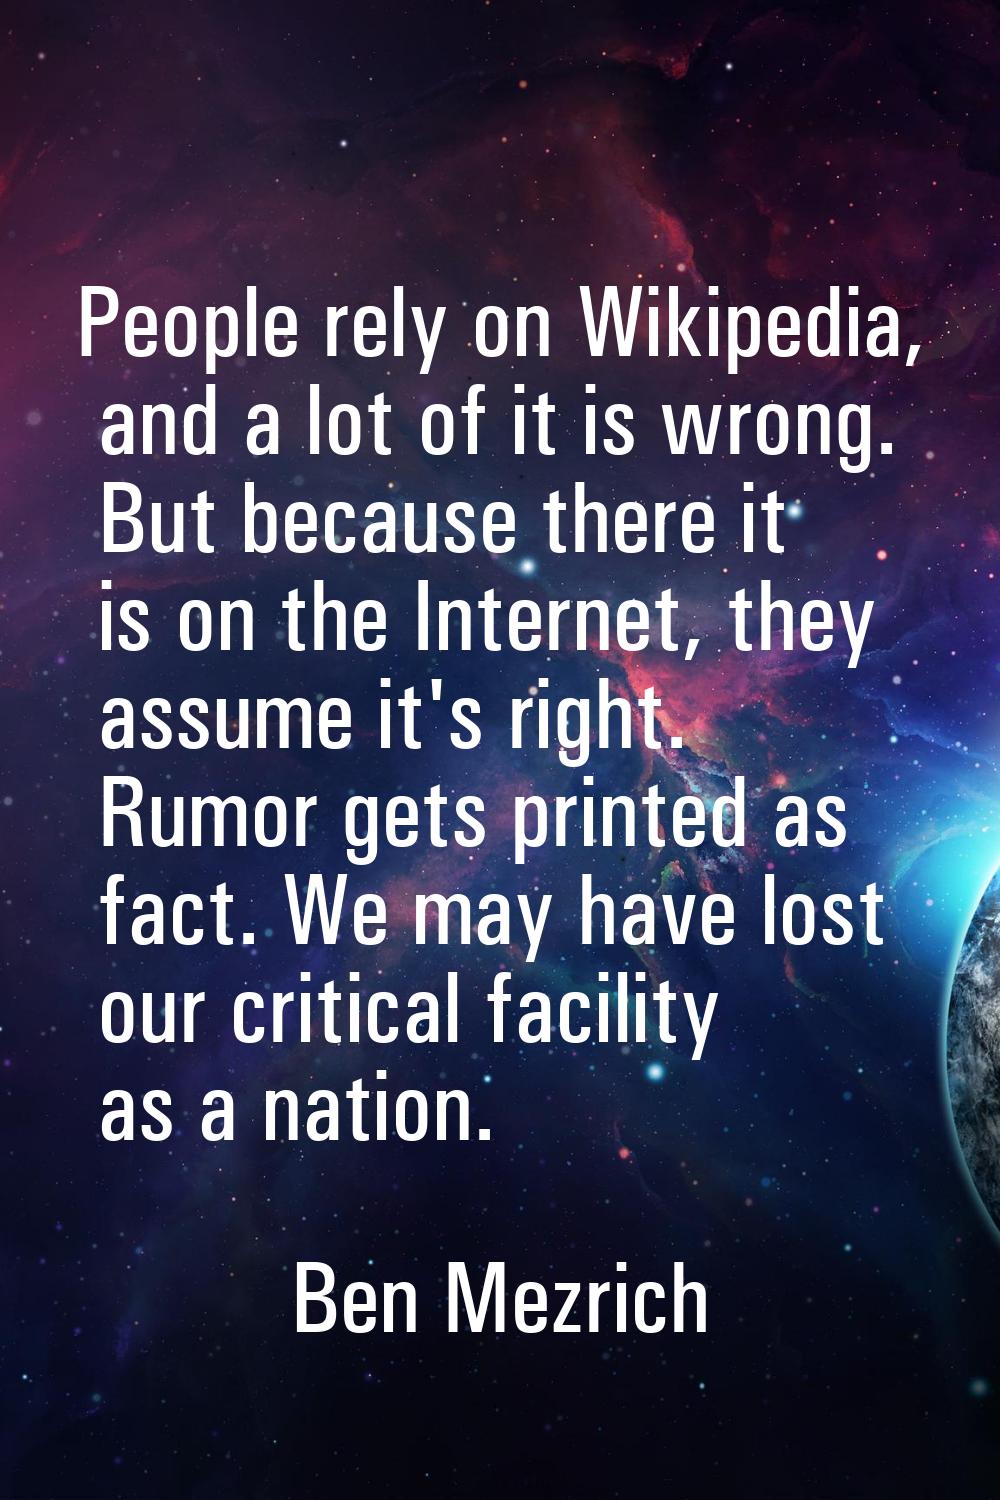 People rely on Wikipedia, and a lot of it is wrong. But because there it is on the Internet, they a